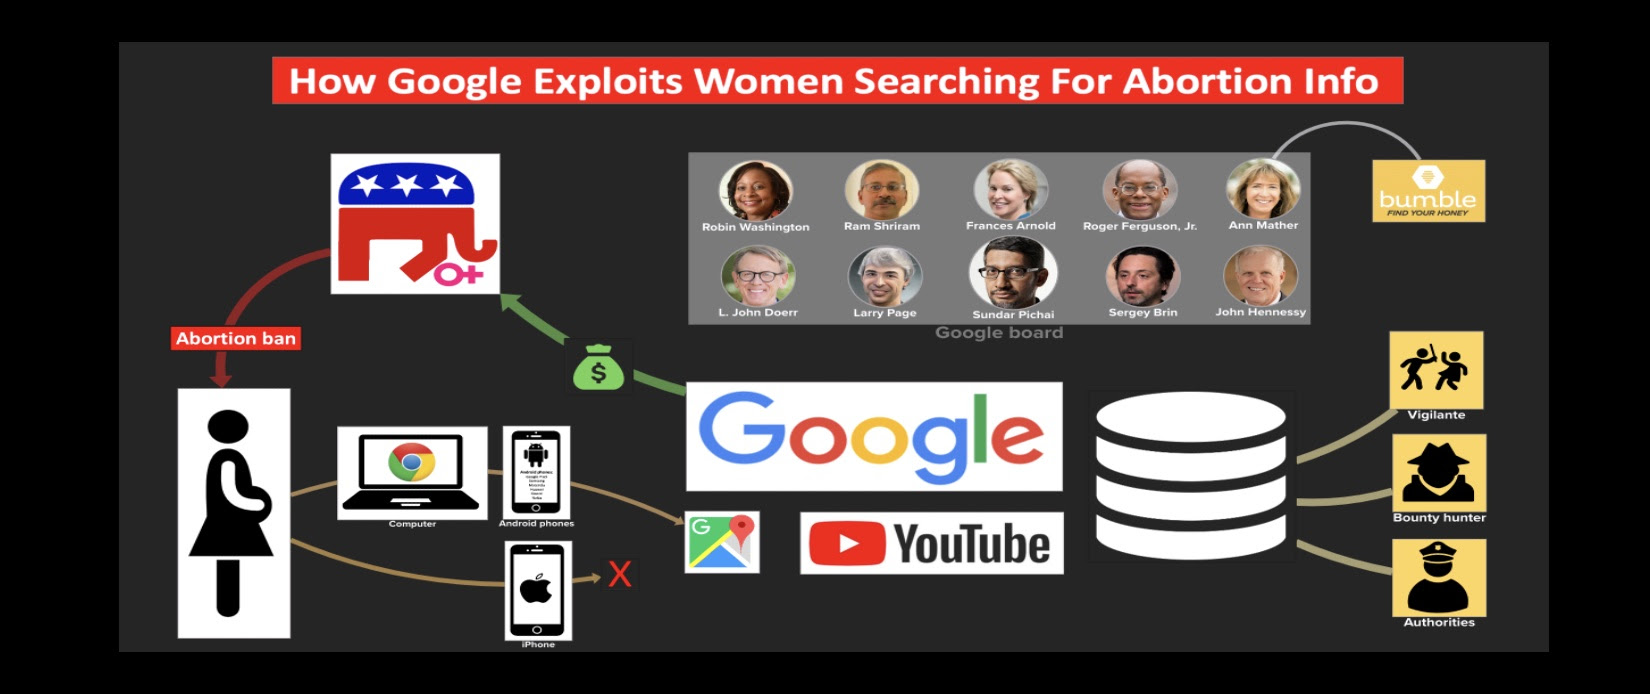 How Google exploits women searching for abortion info